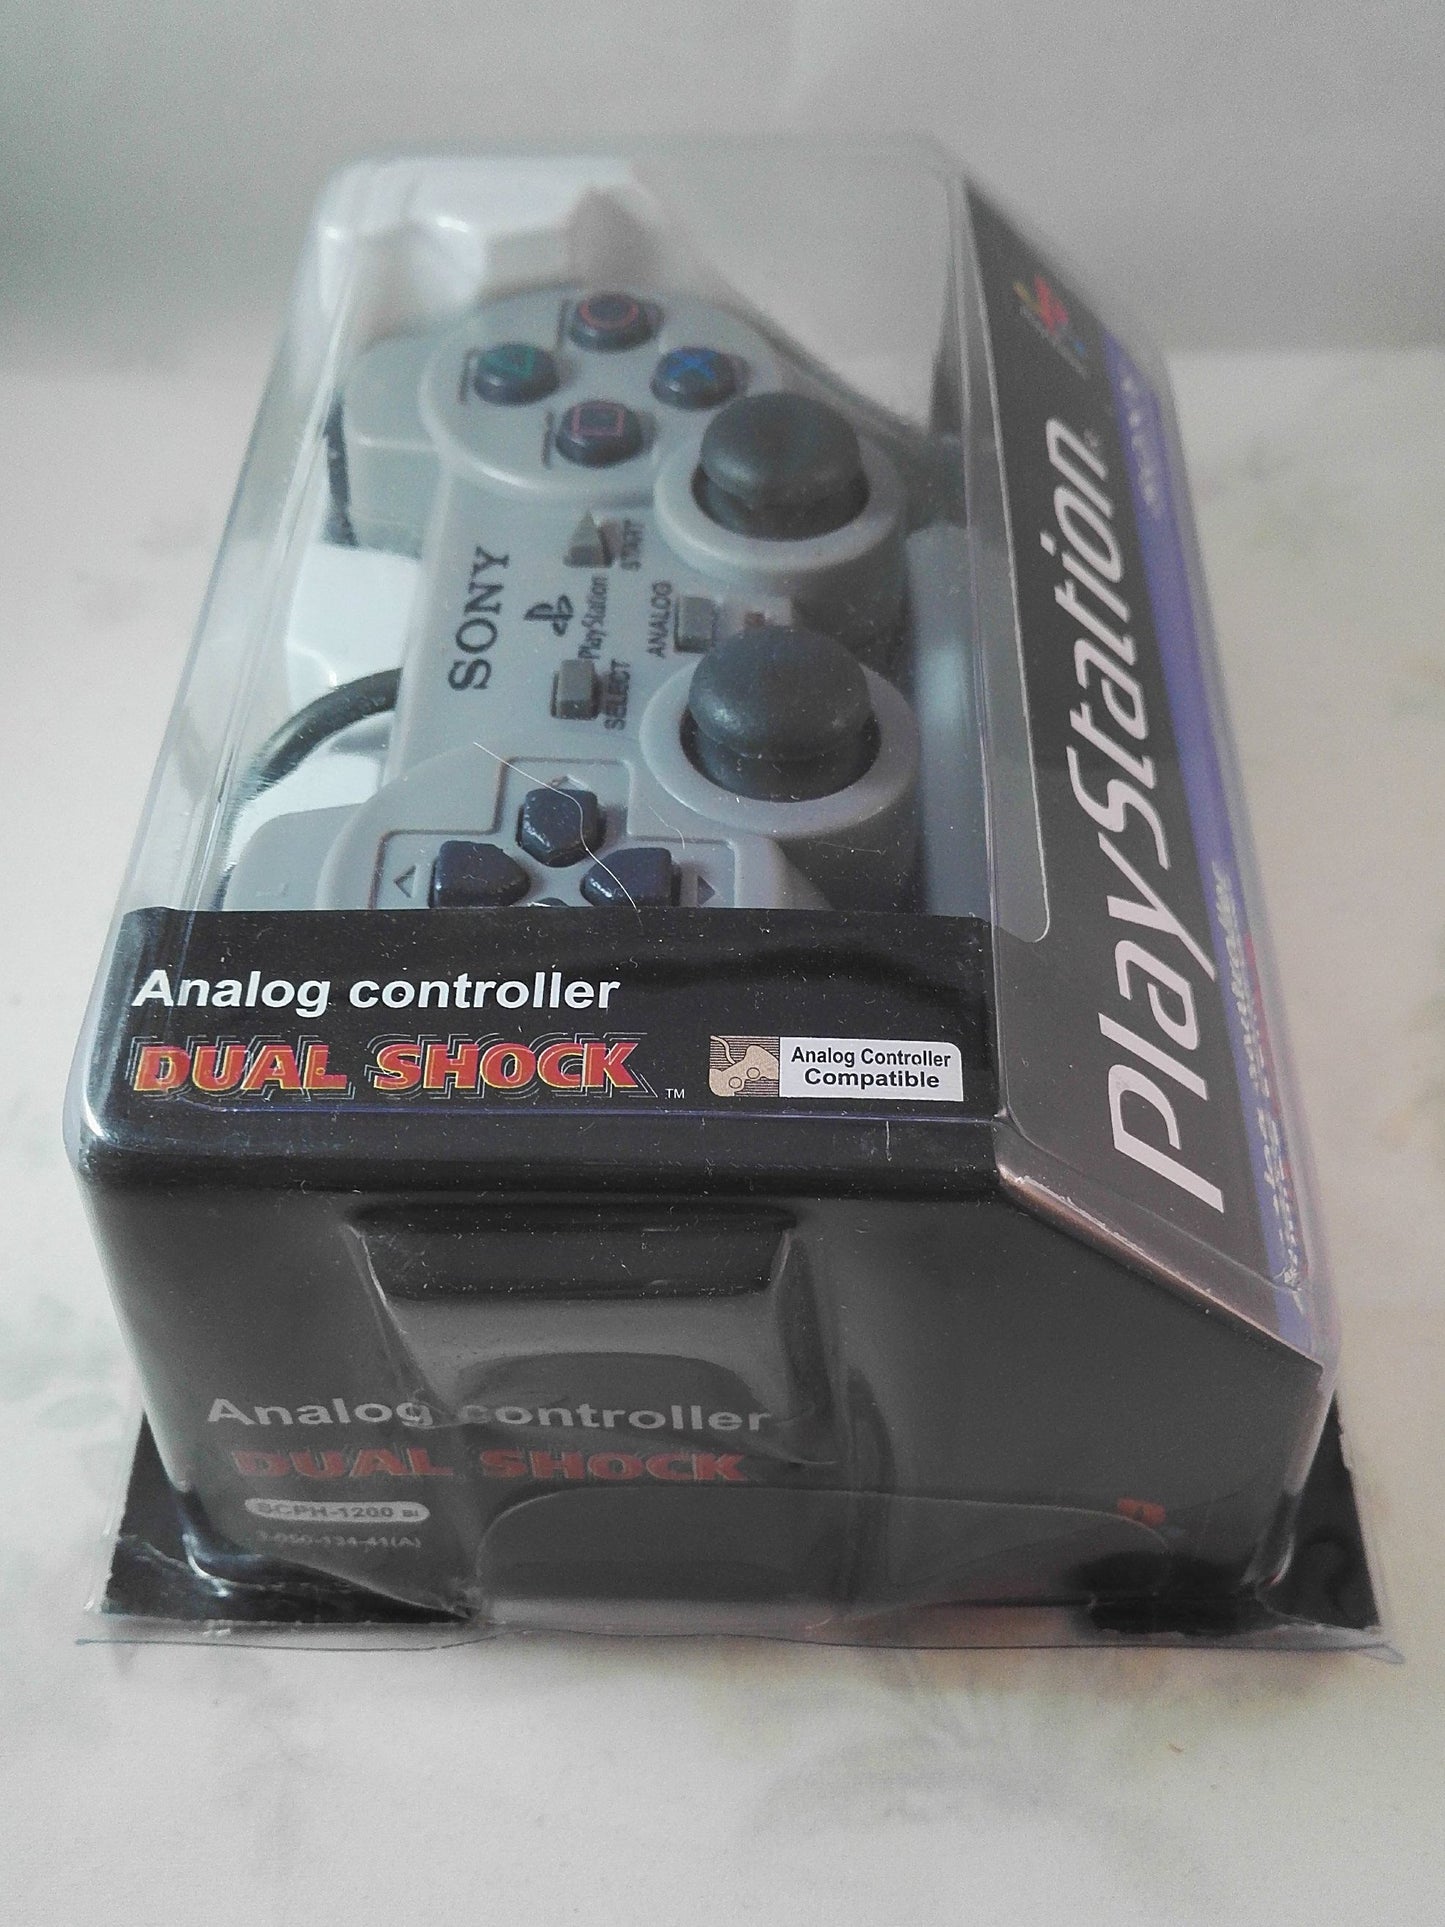 Official Sony PS1 DualShock (PSX ANALOG/BL) SCPH - 1 200 (NEW and Boxed) Accessory RARE